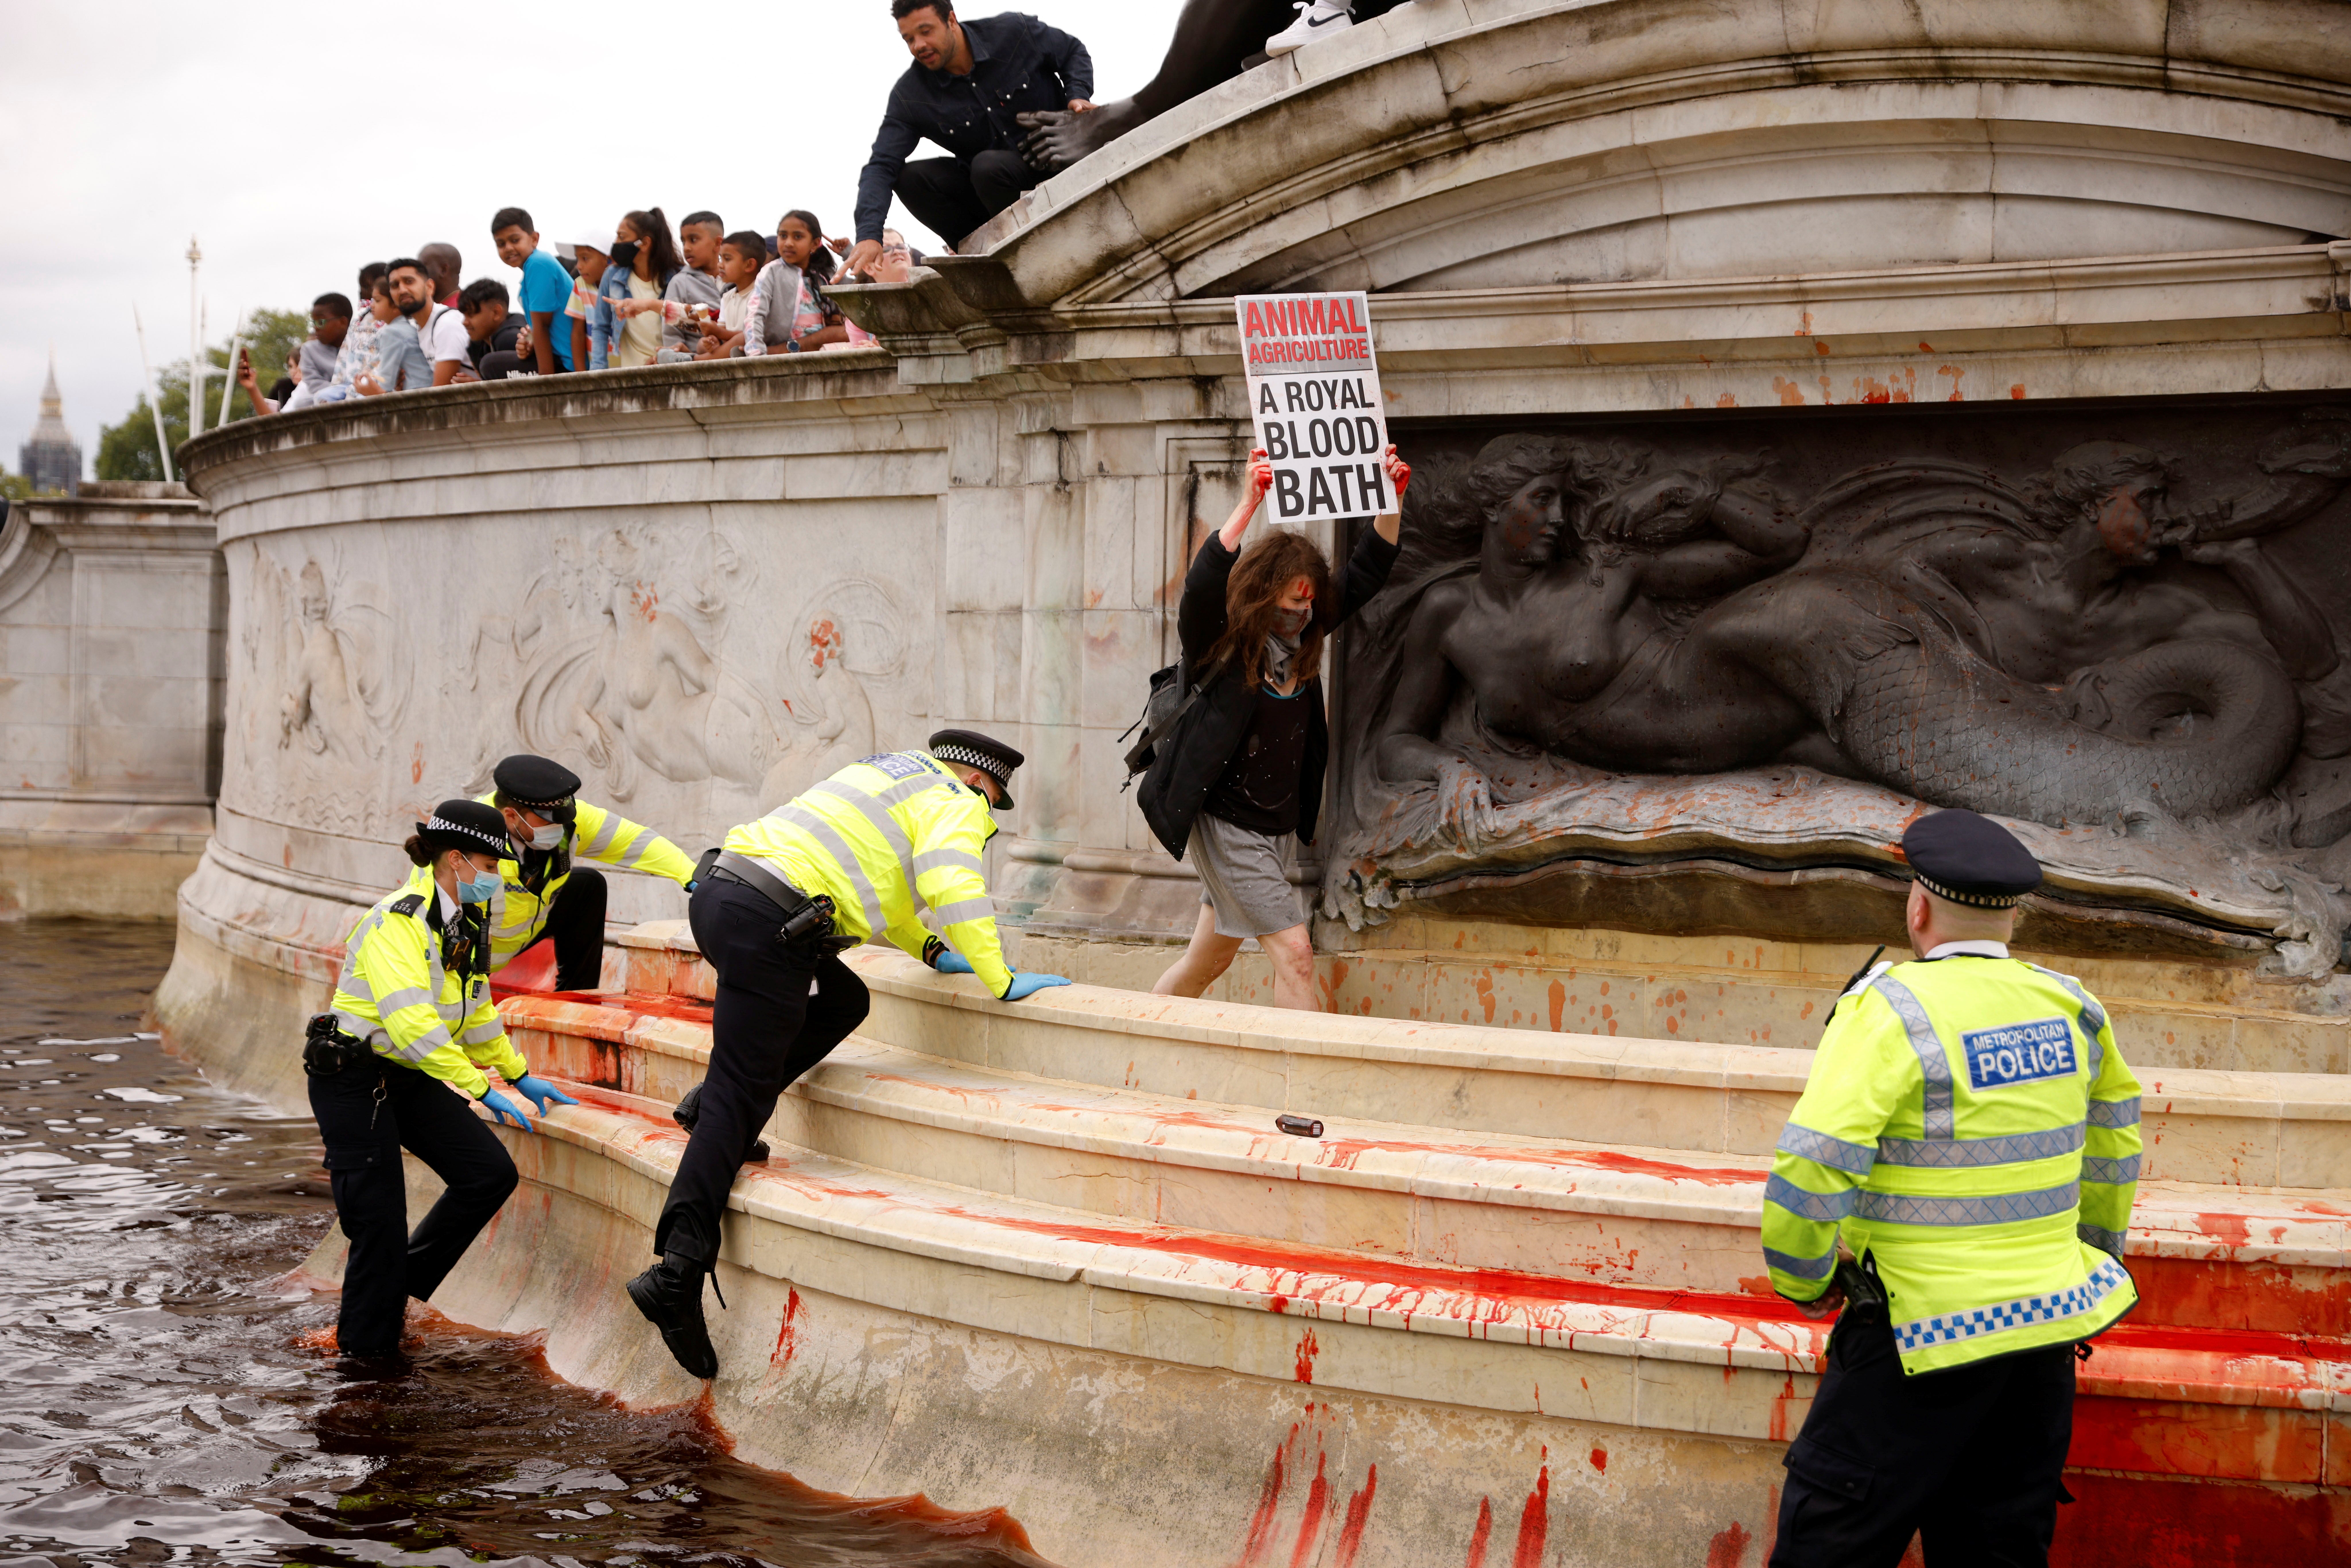 An Extinction Rebellion activist holds a placard in a fountain surrounded by police officers, during a protest next to Buckingham Palace